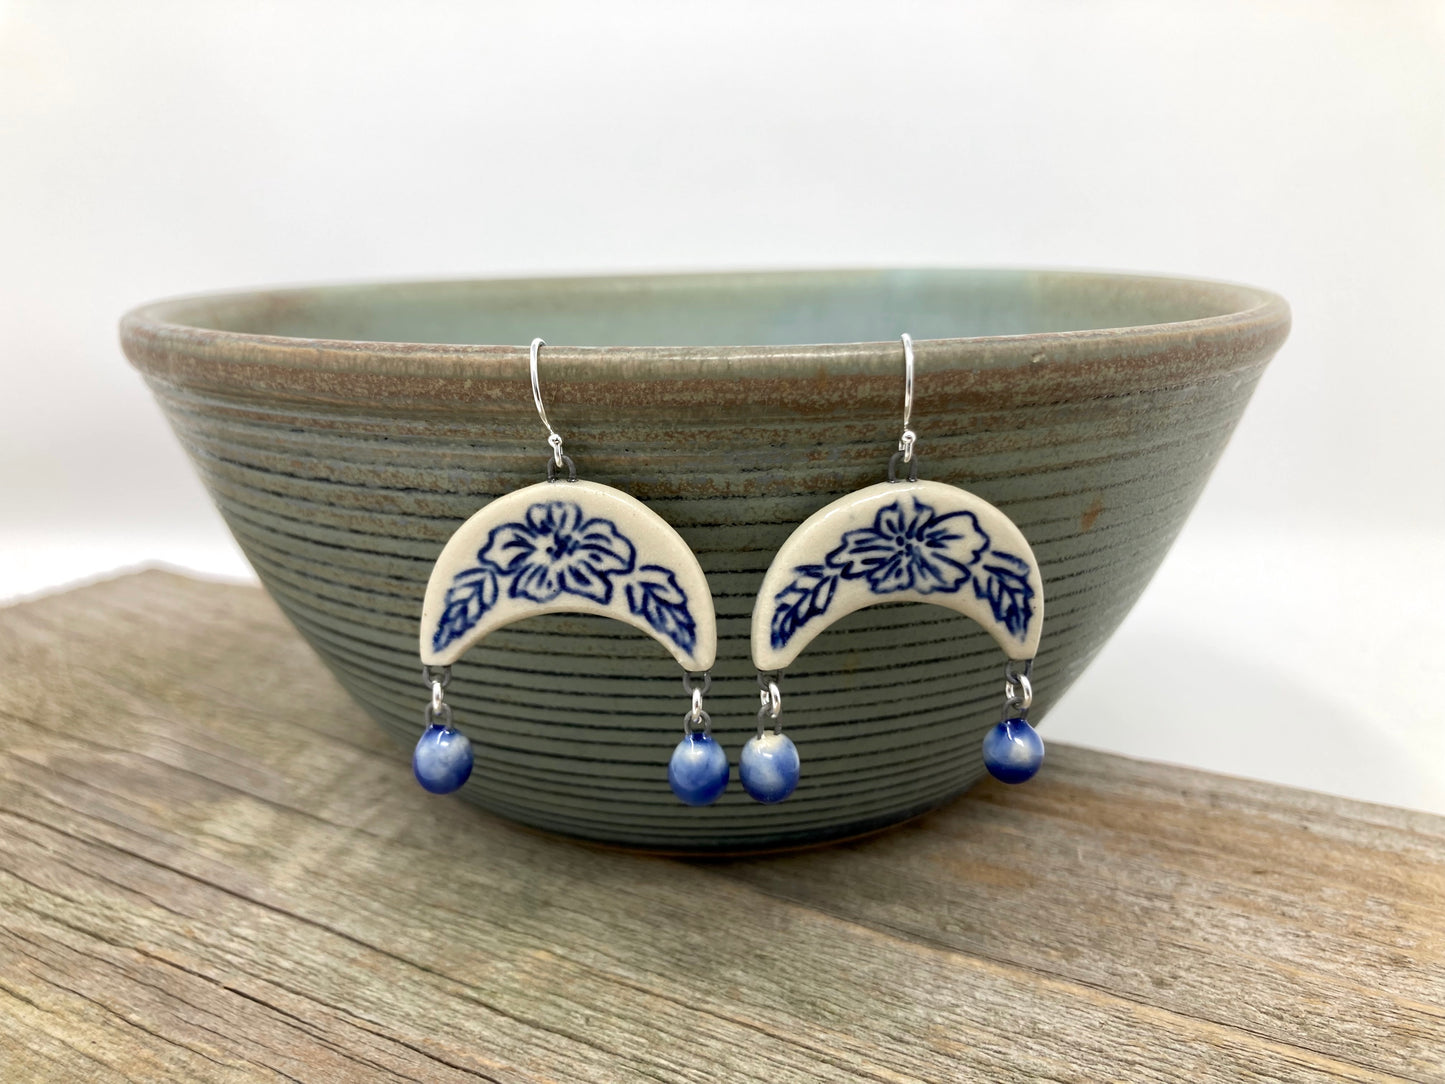 Wild Rose Arch Earrings with Cobalt Dangles, Sterling Silver